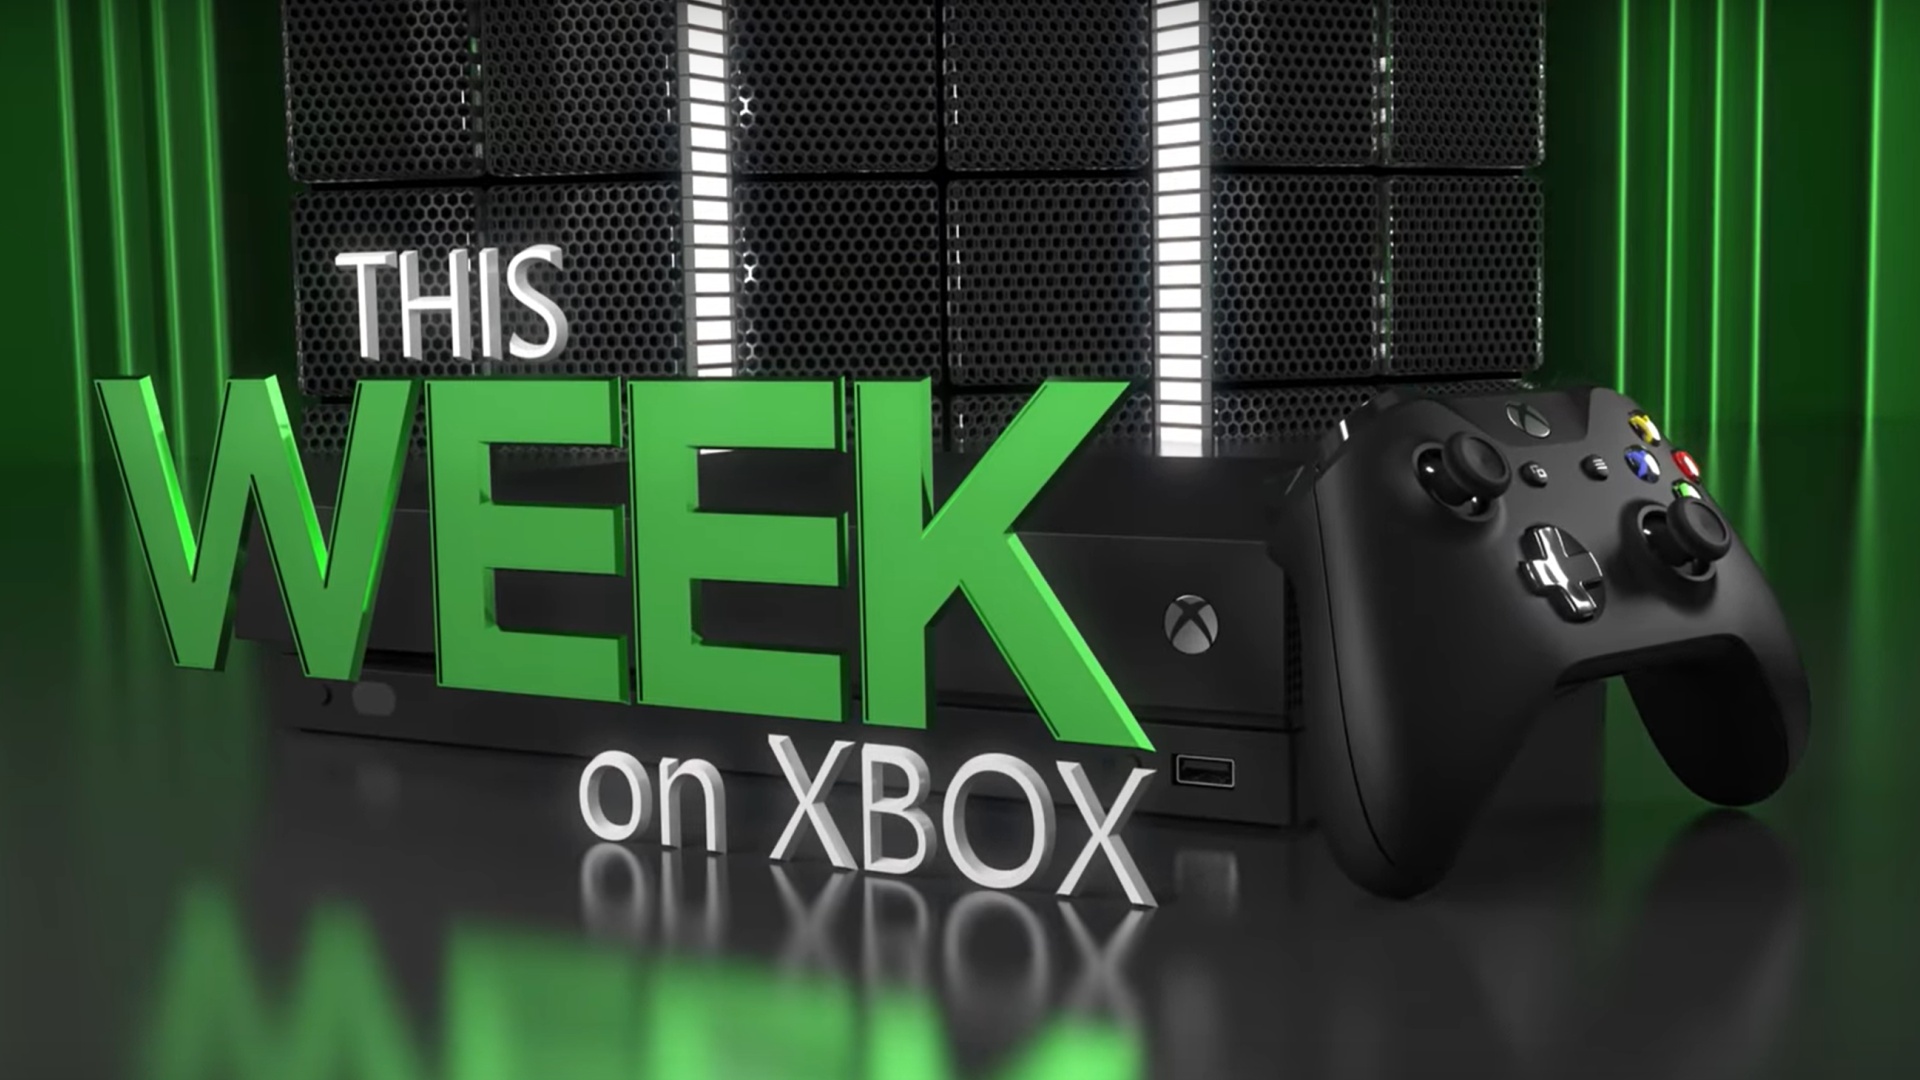 Video For This Week on Xbox: January 3, 2020